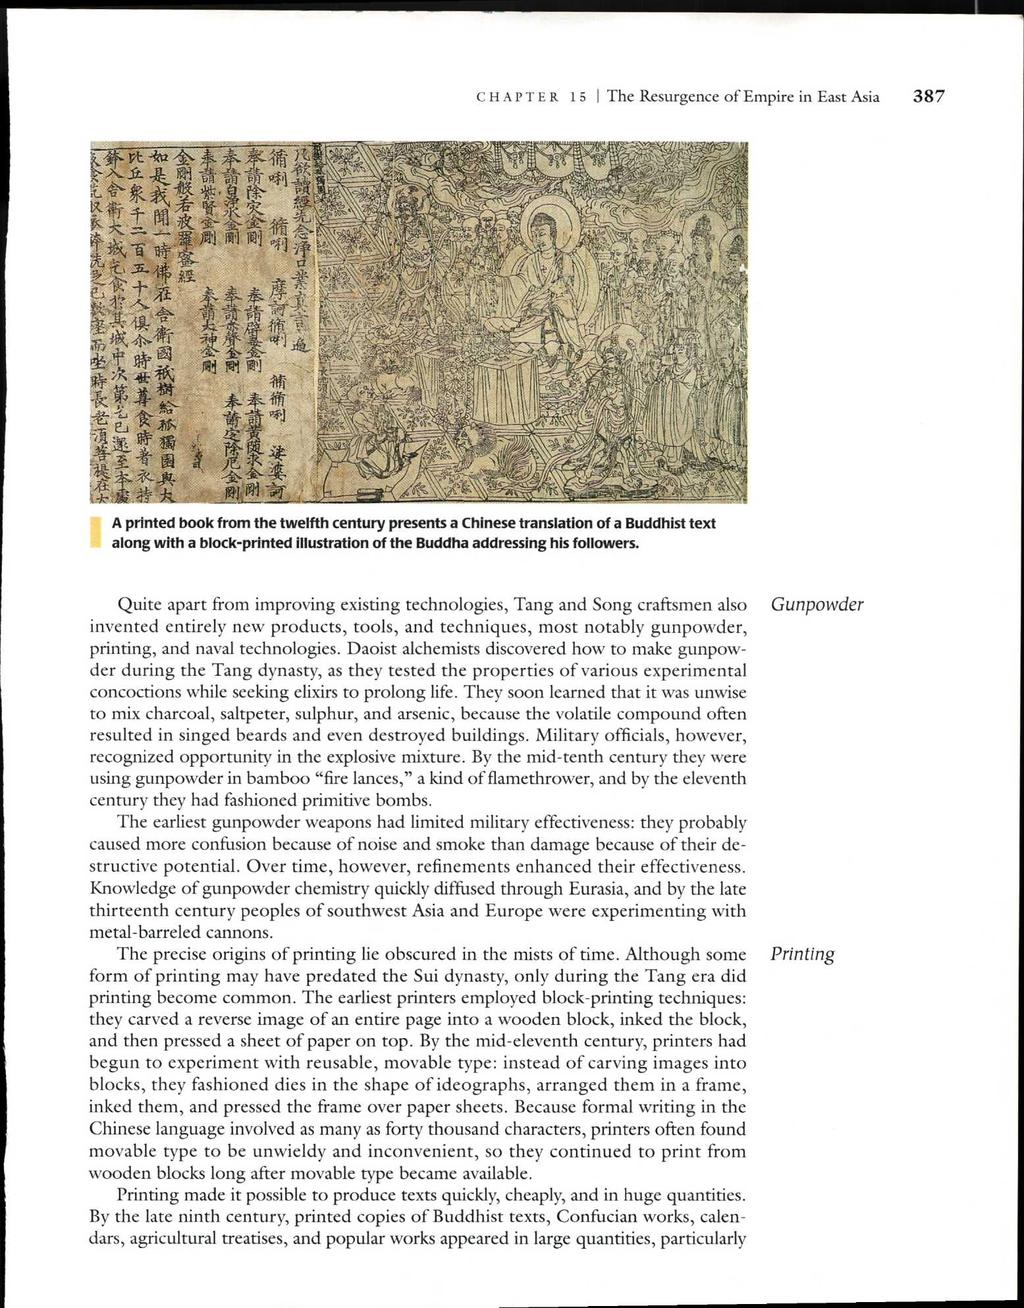 CHAPTER 15 I The Resurgence of Empire in East Asia 387 A printed book from the twelfth century presents a Chinese translation of a Buddhist text along with a block-printed illustration of the Buddha